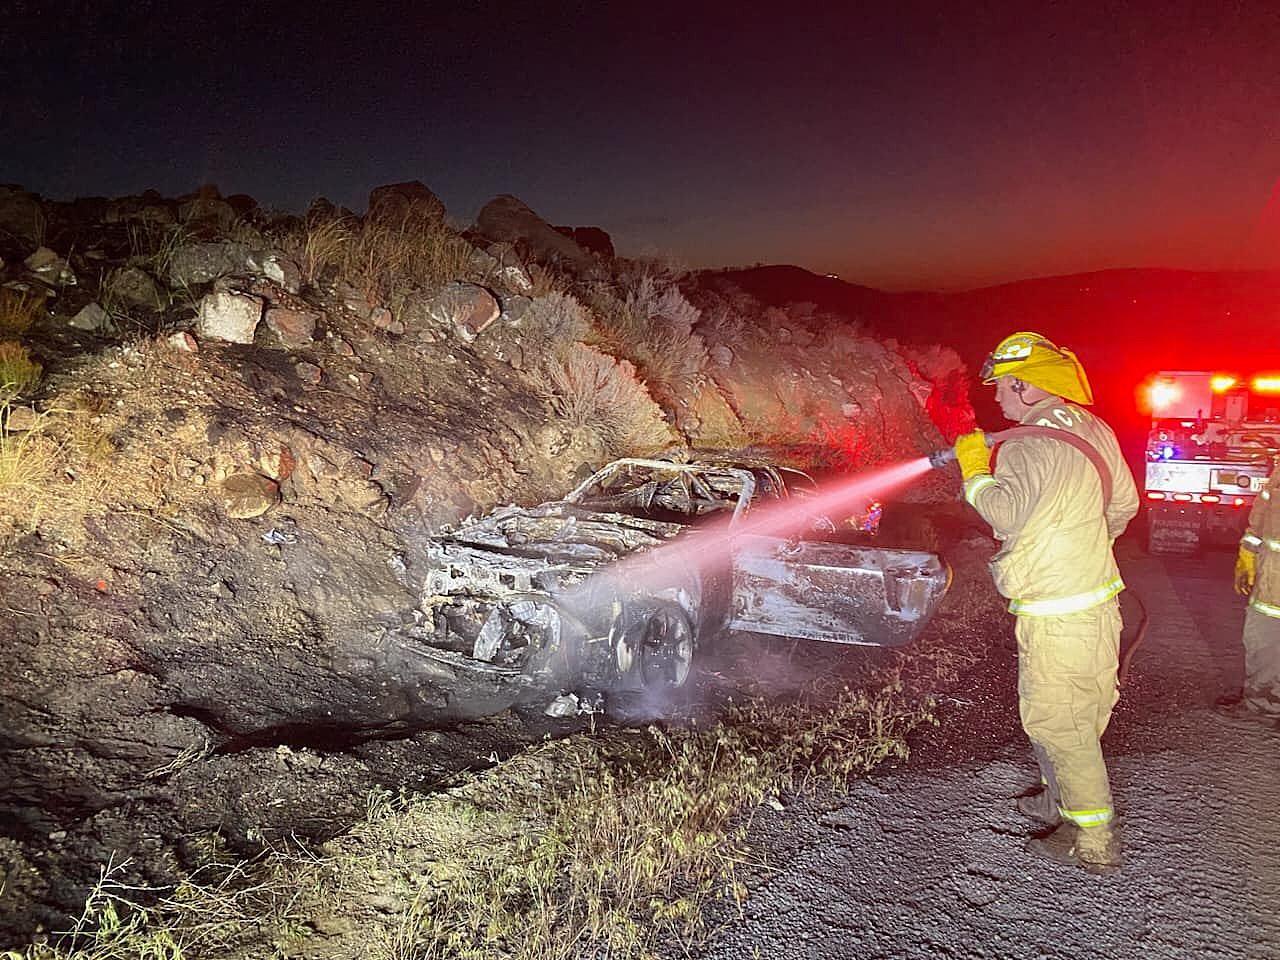 Western WA Stolen Car Found in Flames in Benton County hq nude pic